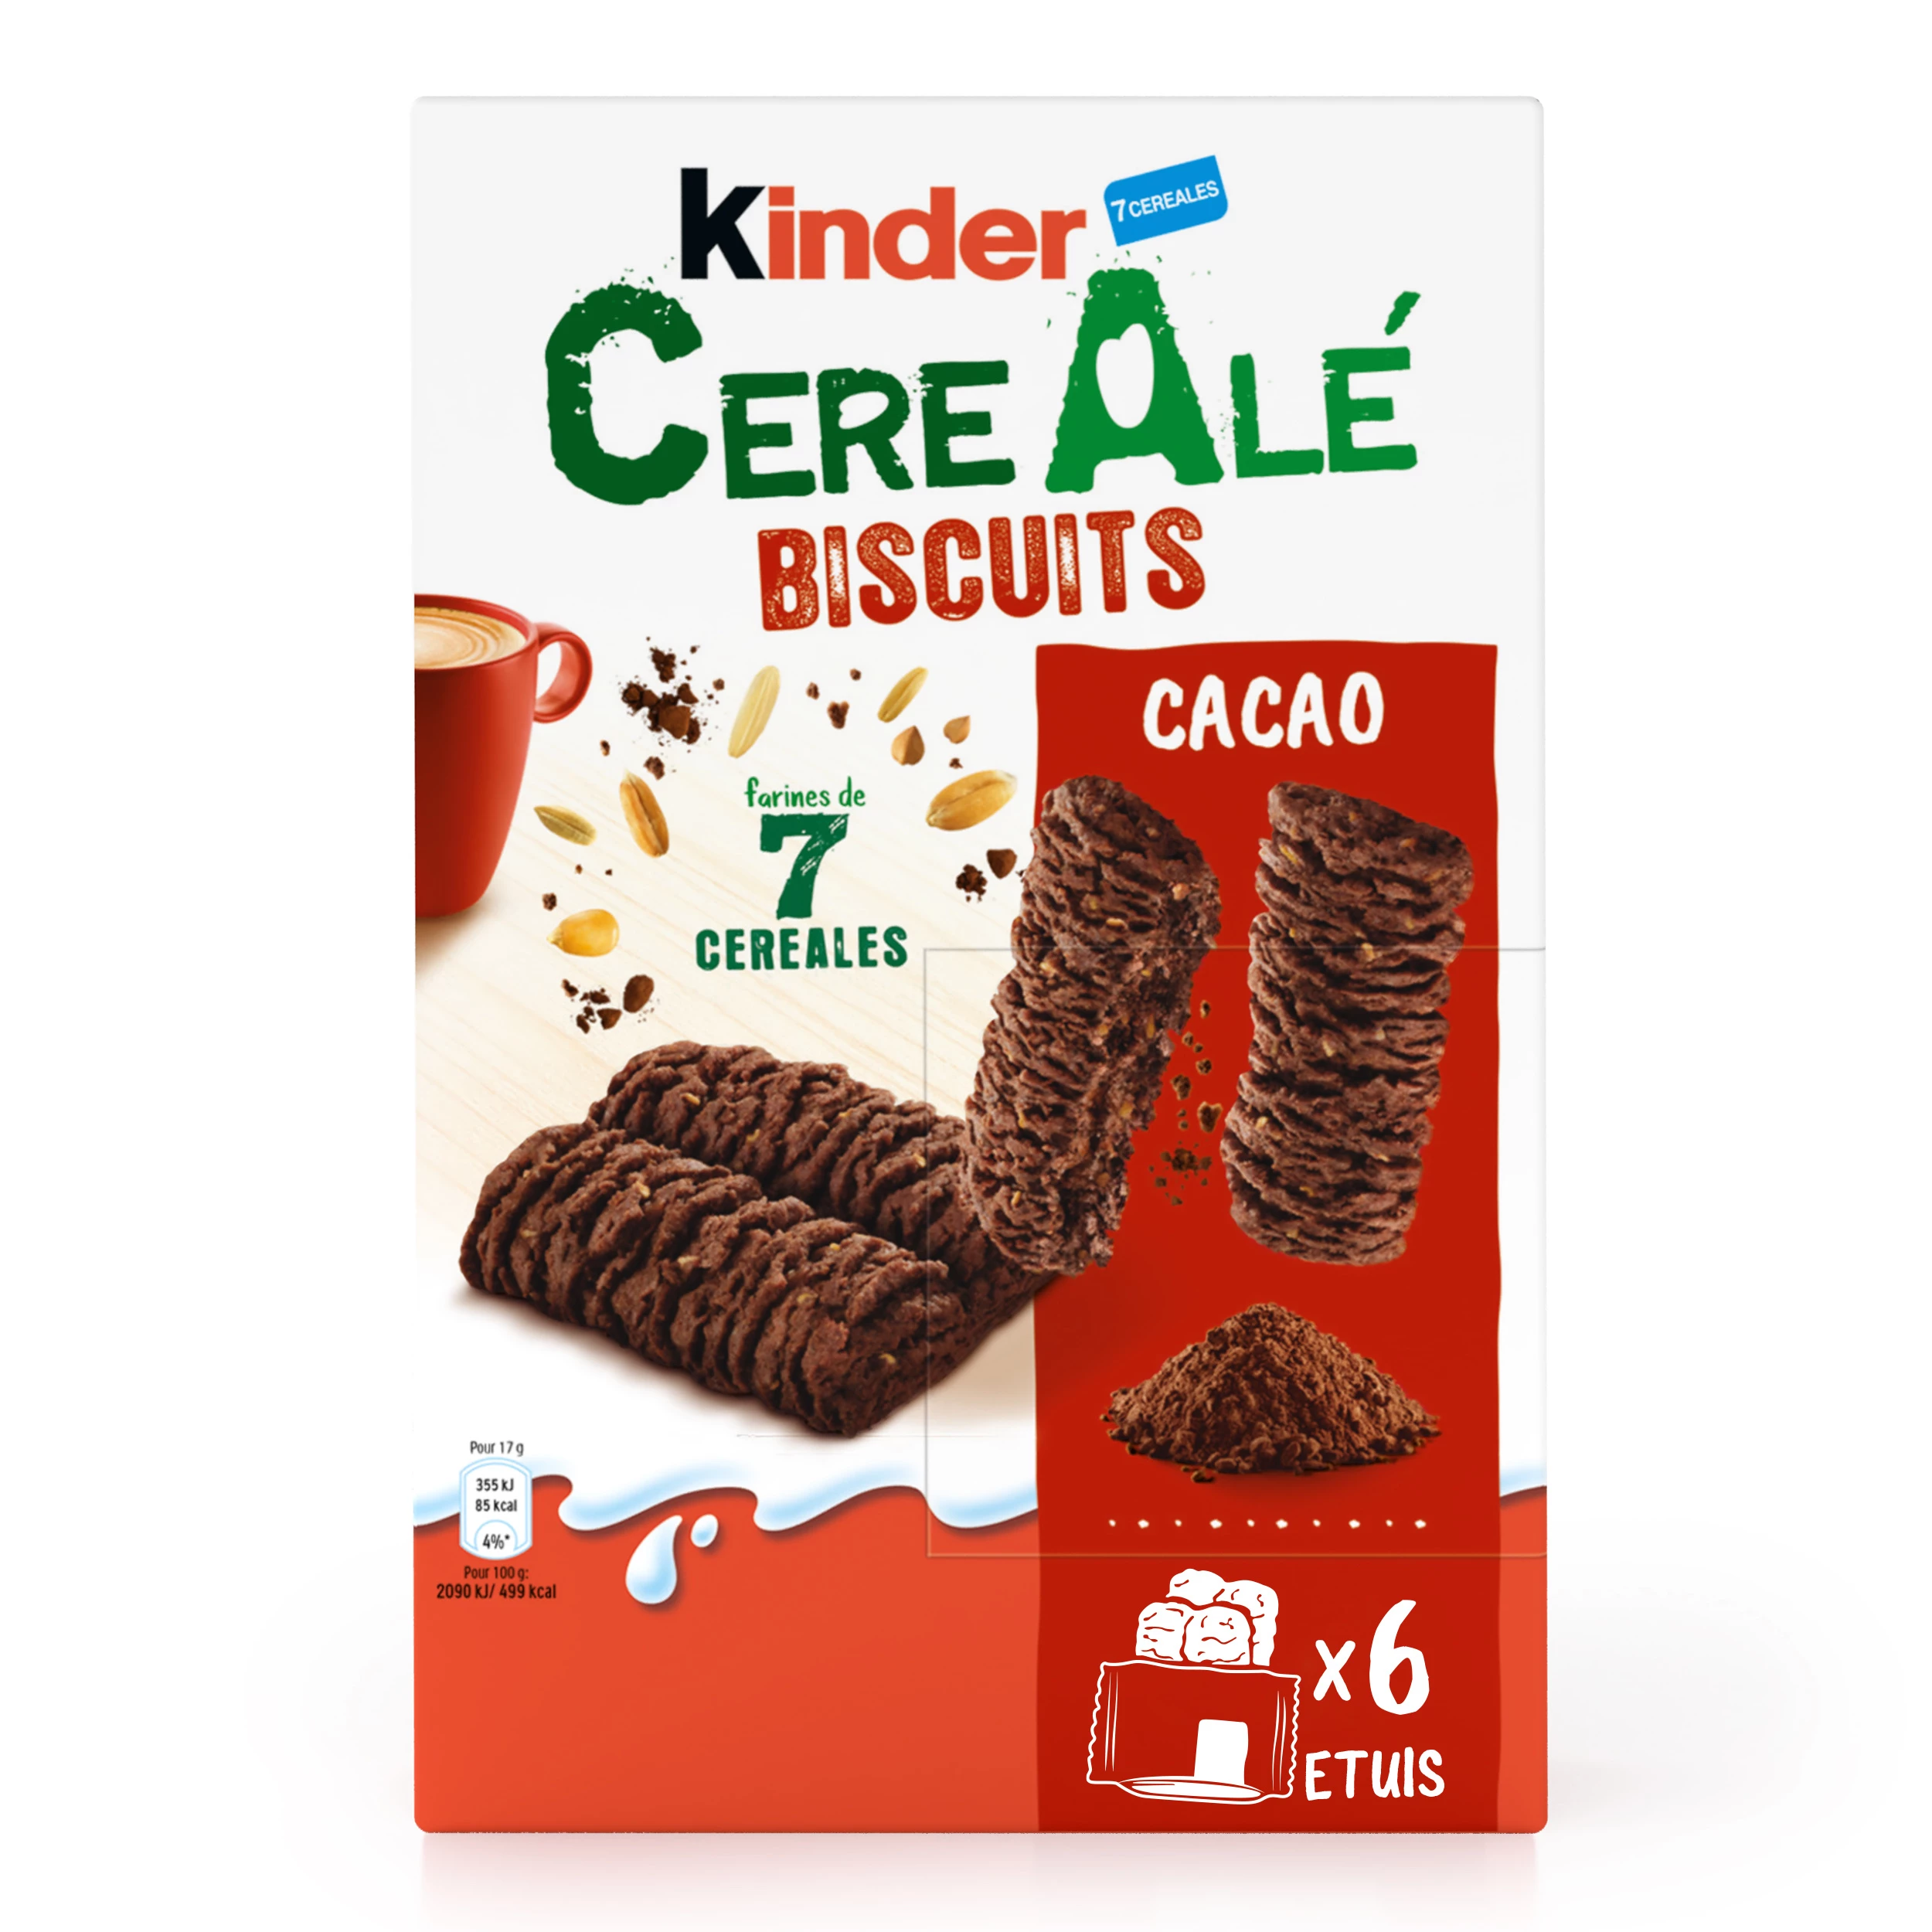 Cereal and cocoa biscuits - 204g - KINDER